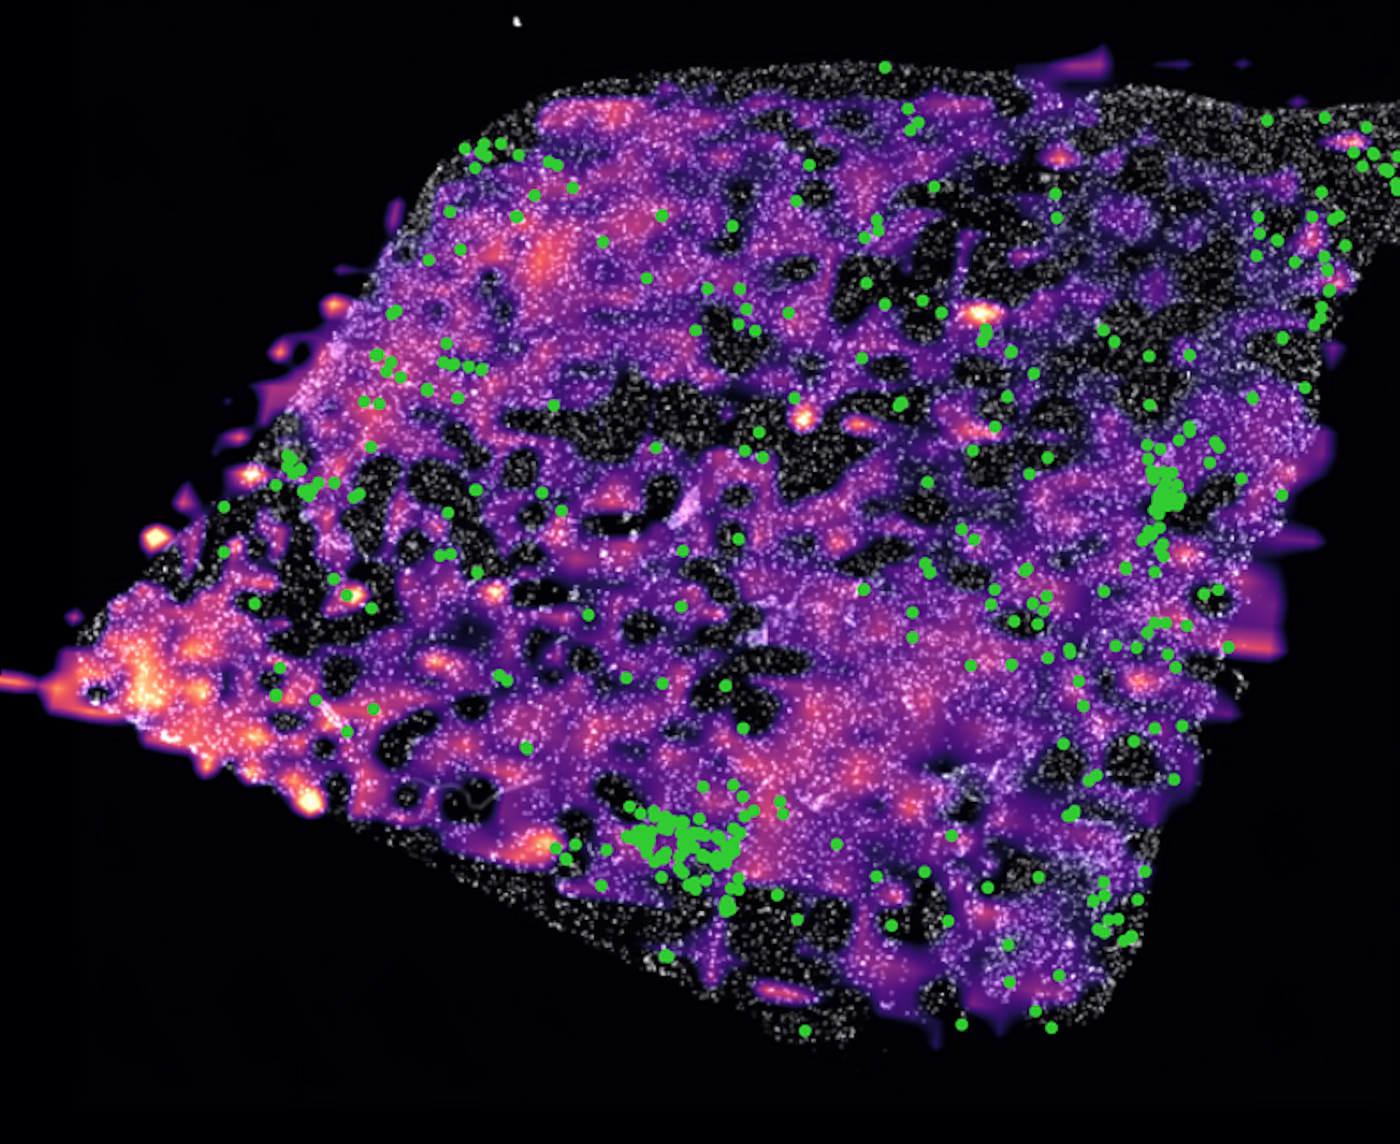 An IDH-mutant human glioma tumor, showing clusters of CD8+ T cells (green) and a gradient (purple to pink) representing low to high D-2HG concentrations. D-2HG and CD8+ T levels are inversely correlated. / Image credit: Gregory Baker, HMS